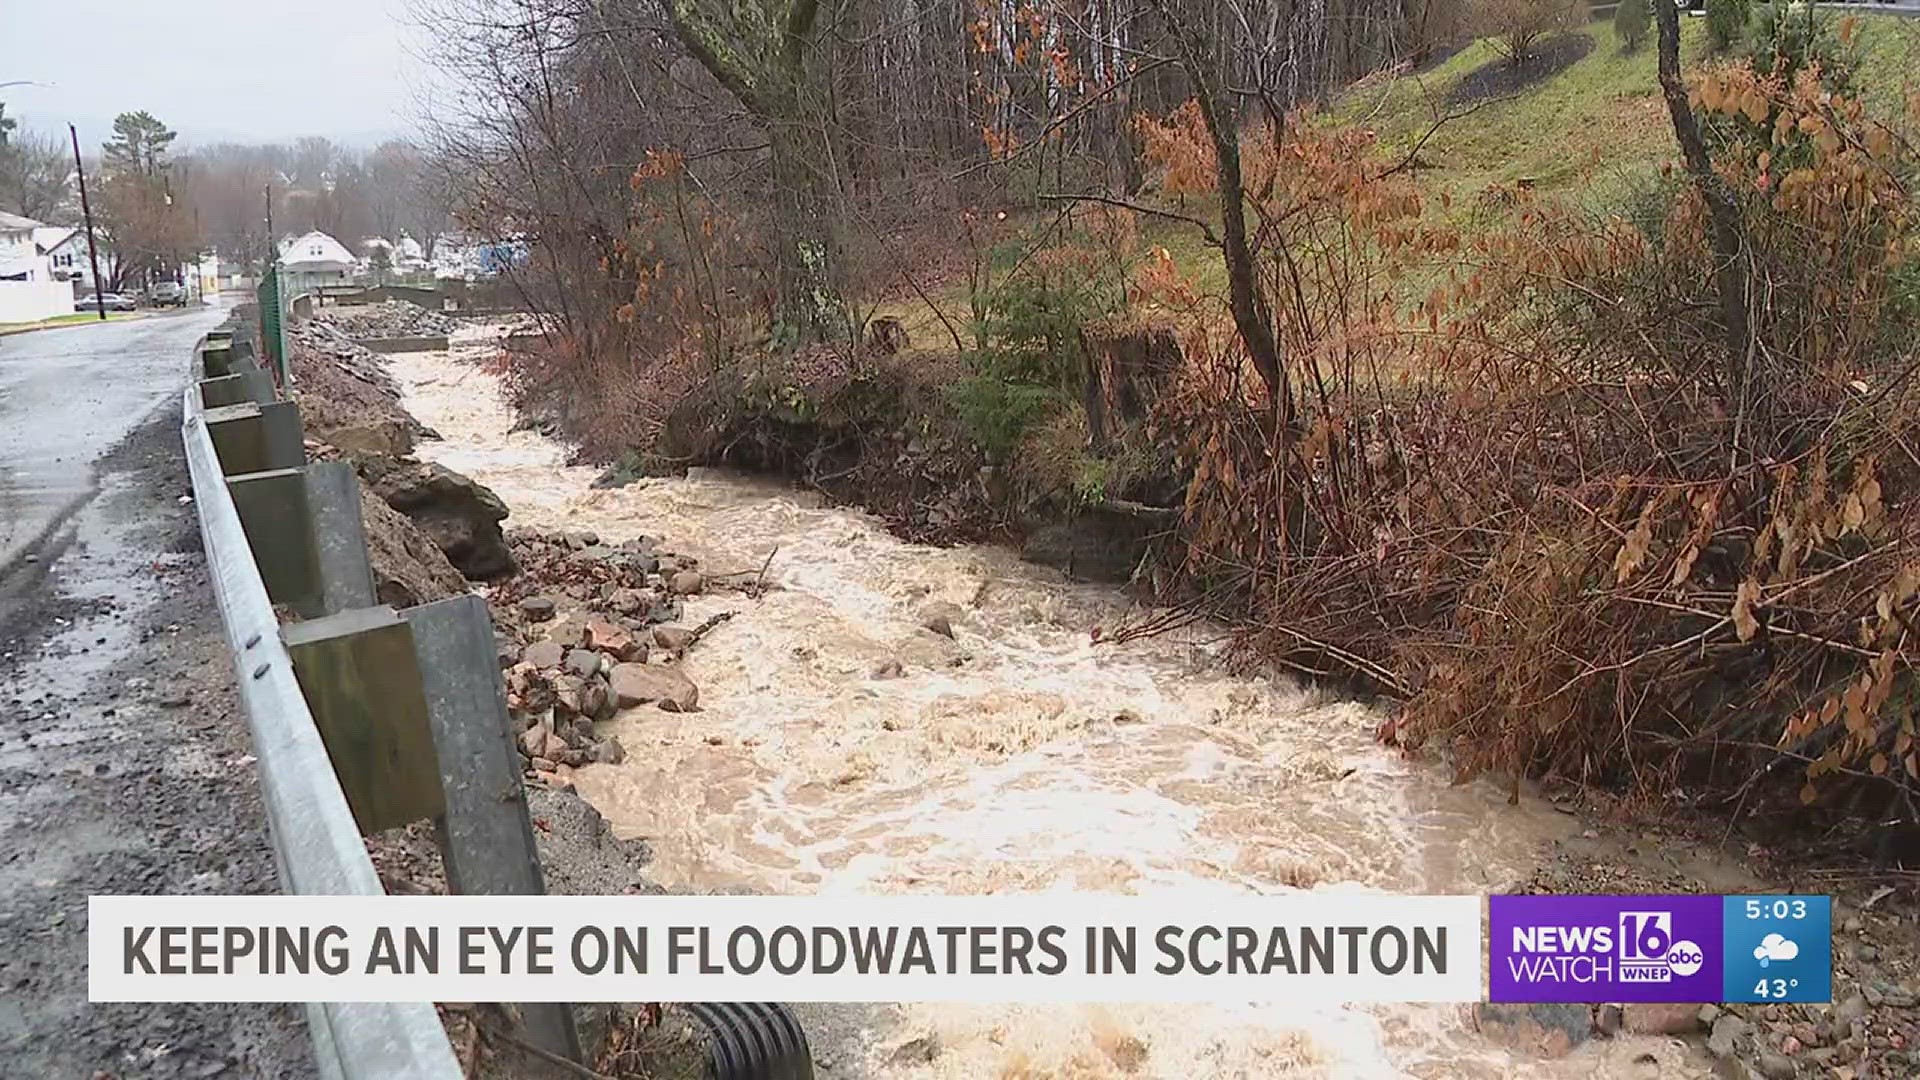 Emergency flood precautions were in effect on Monday after heavy overnight rain.